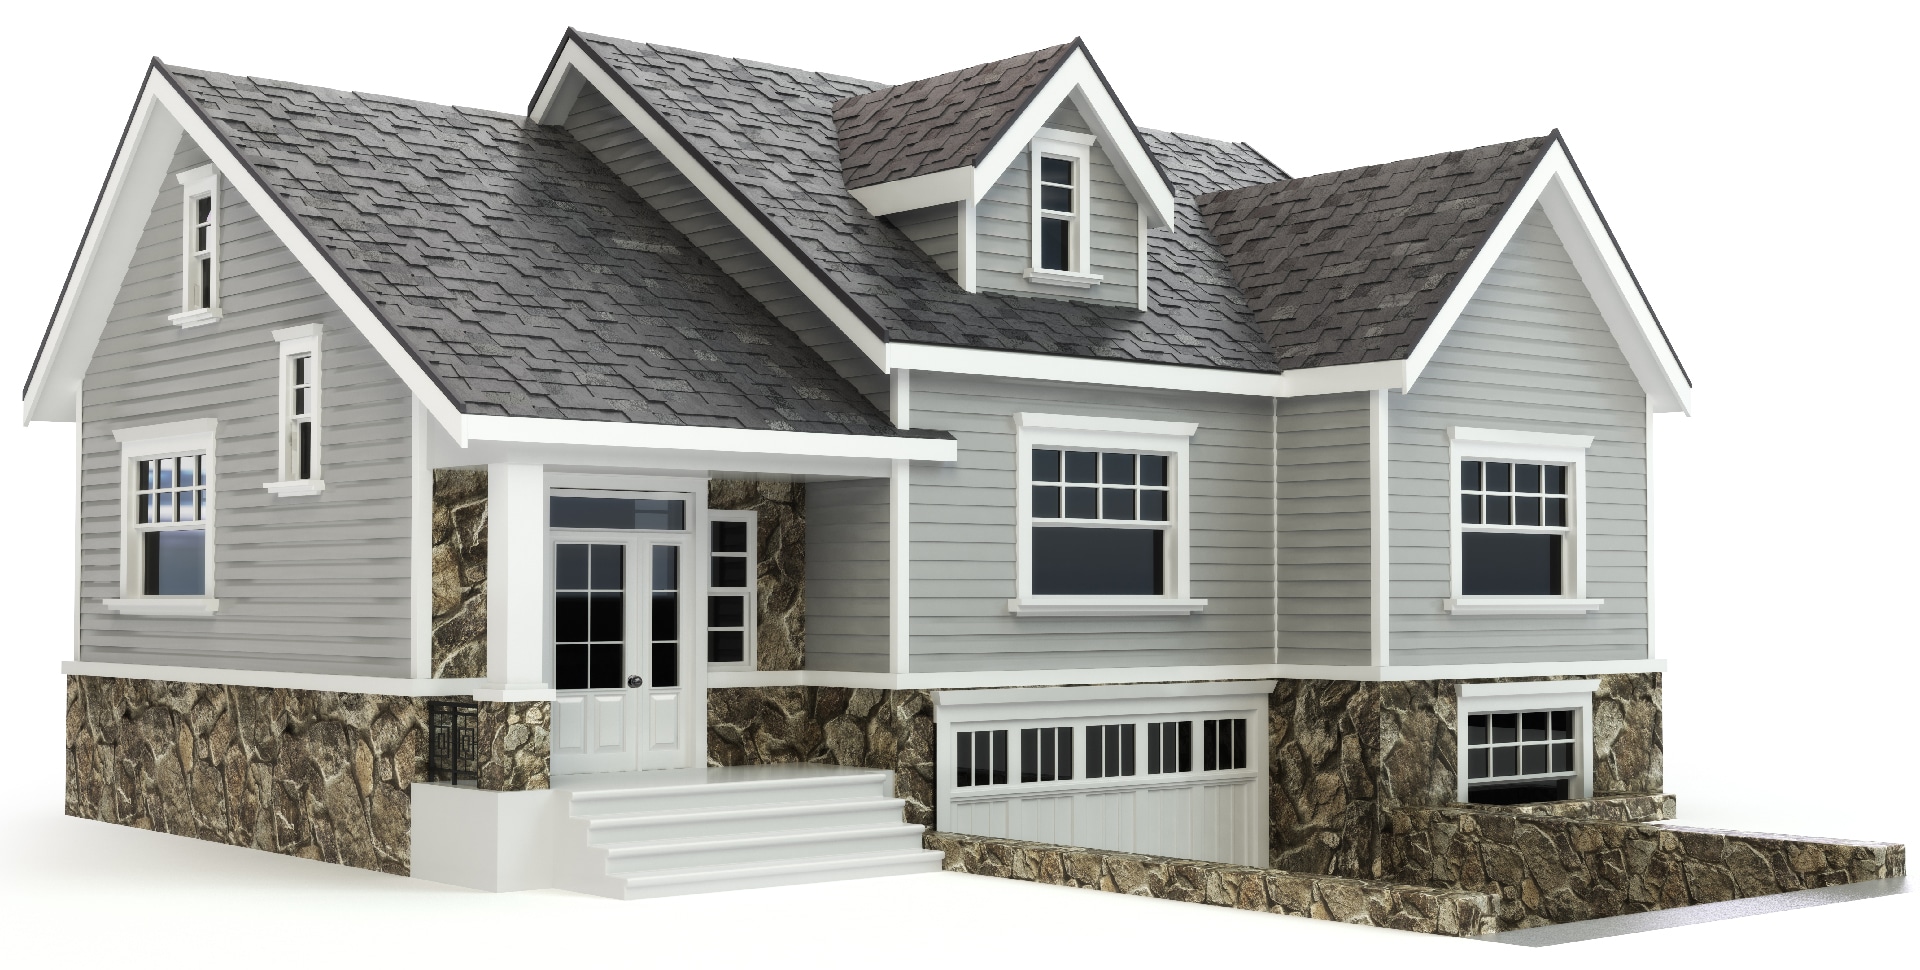 House on isolated, white, cutout background. with sloped roof and asphalt shingles.